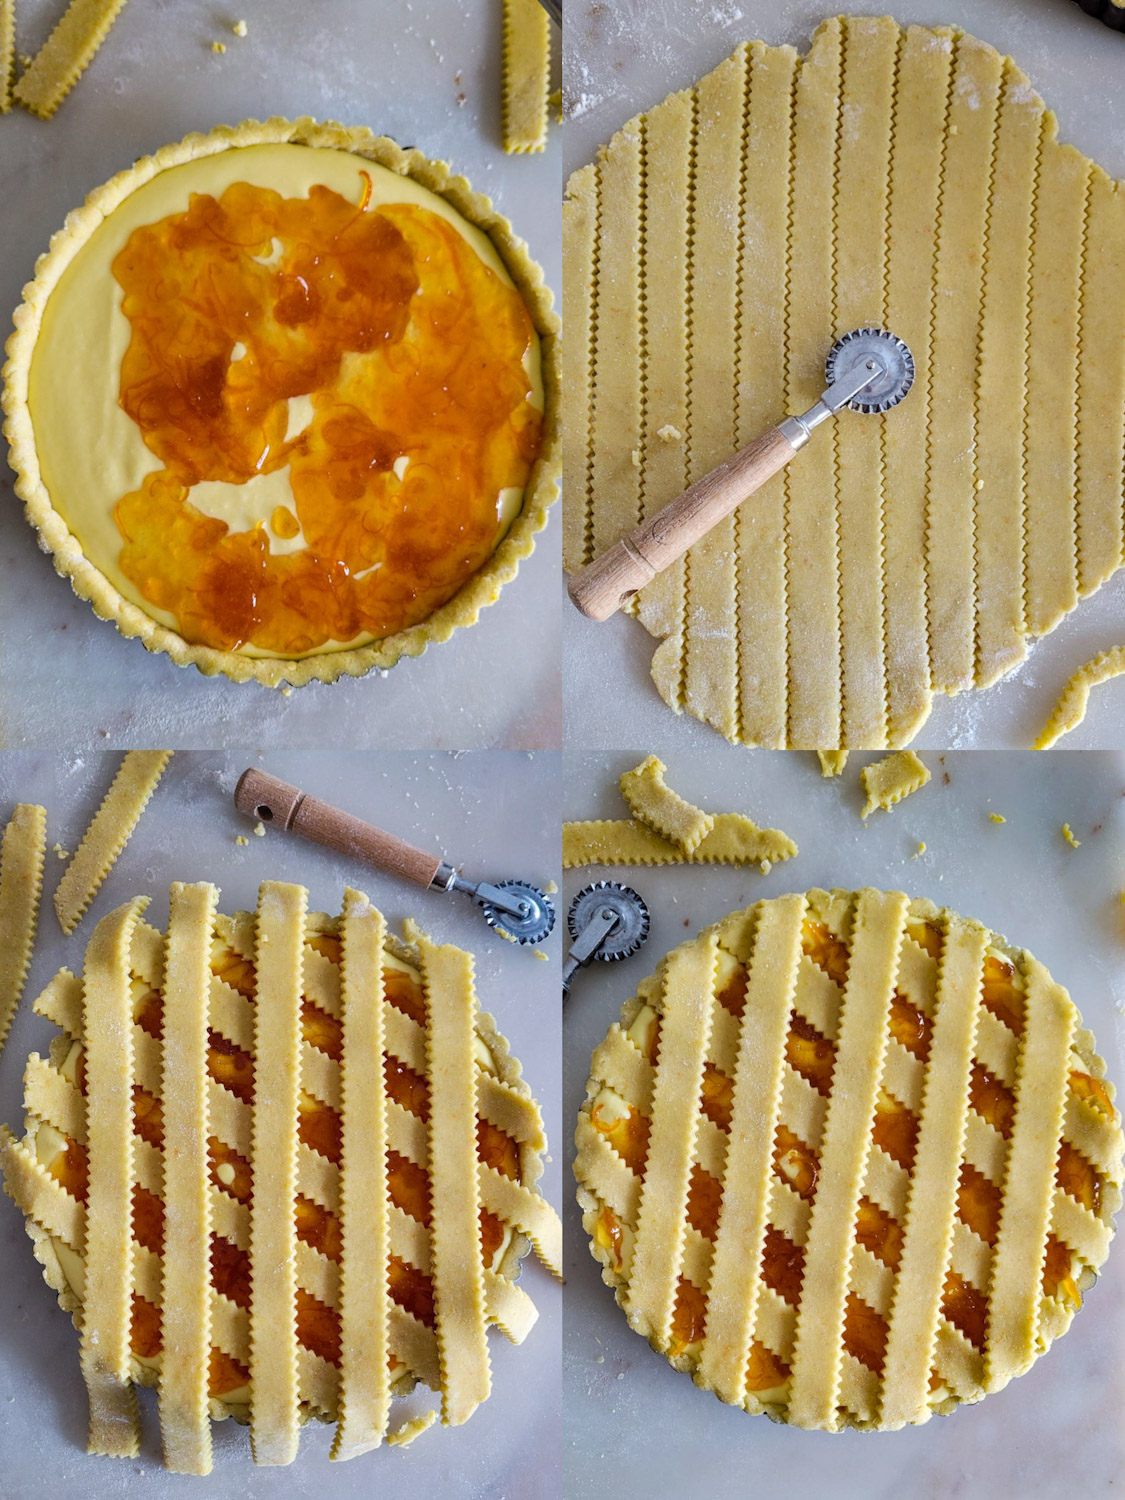 Collage showing the assembly of a Marmalade Ricotta Crostata, including the lattice work on the tart.